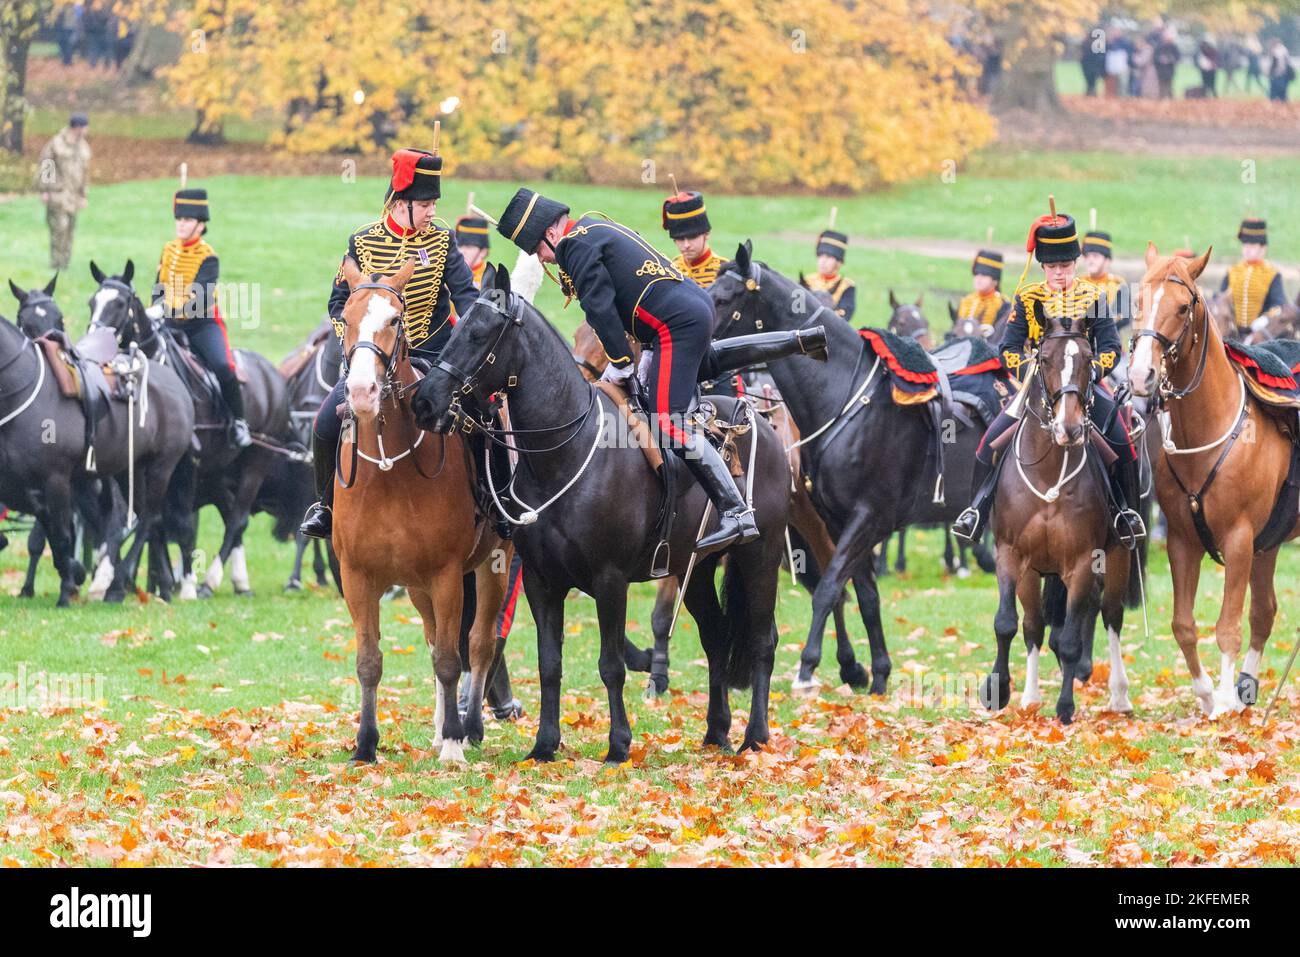 Kings Troop, Royal Horse Artillery carried out a 41 gun salute for the King Charles III's birthday in Green Park, London, UK. Rider mounting a horse Stock Photo